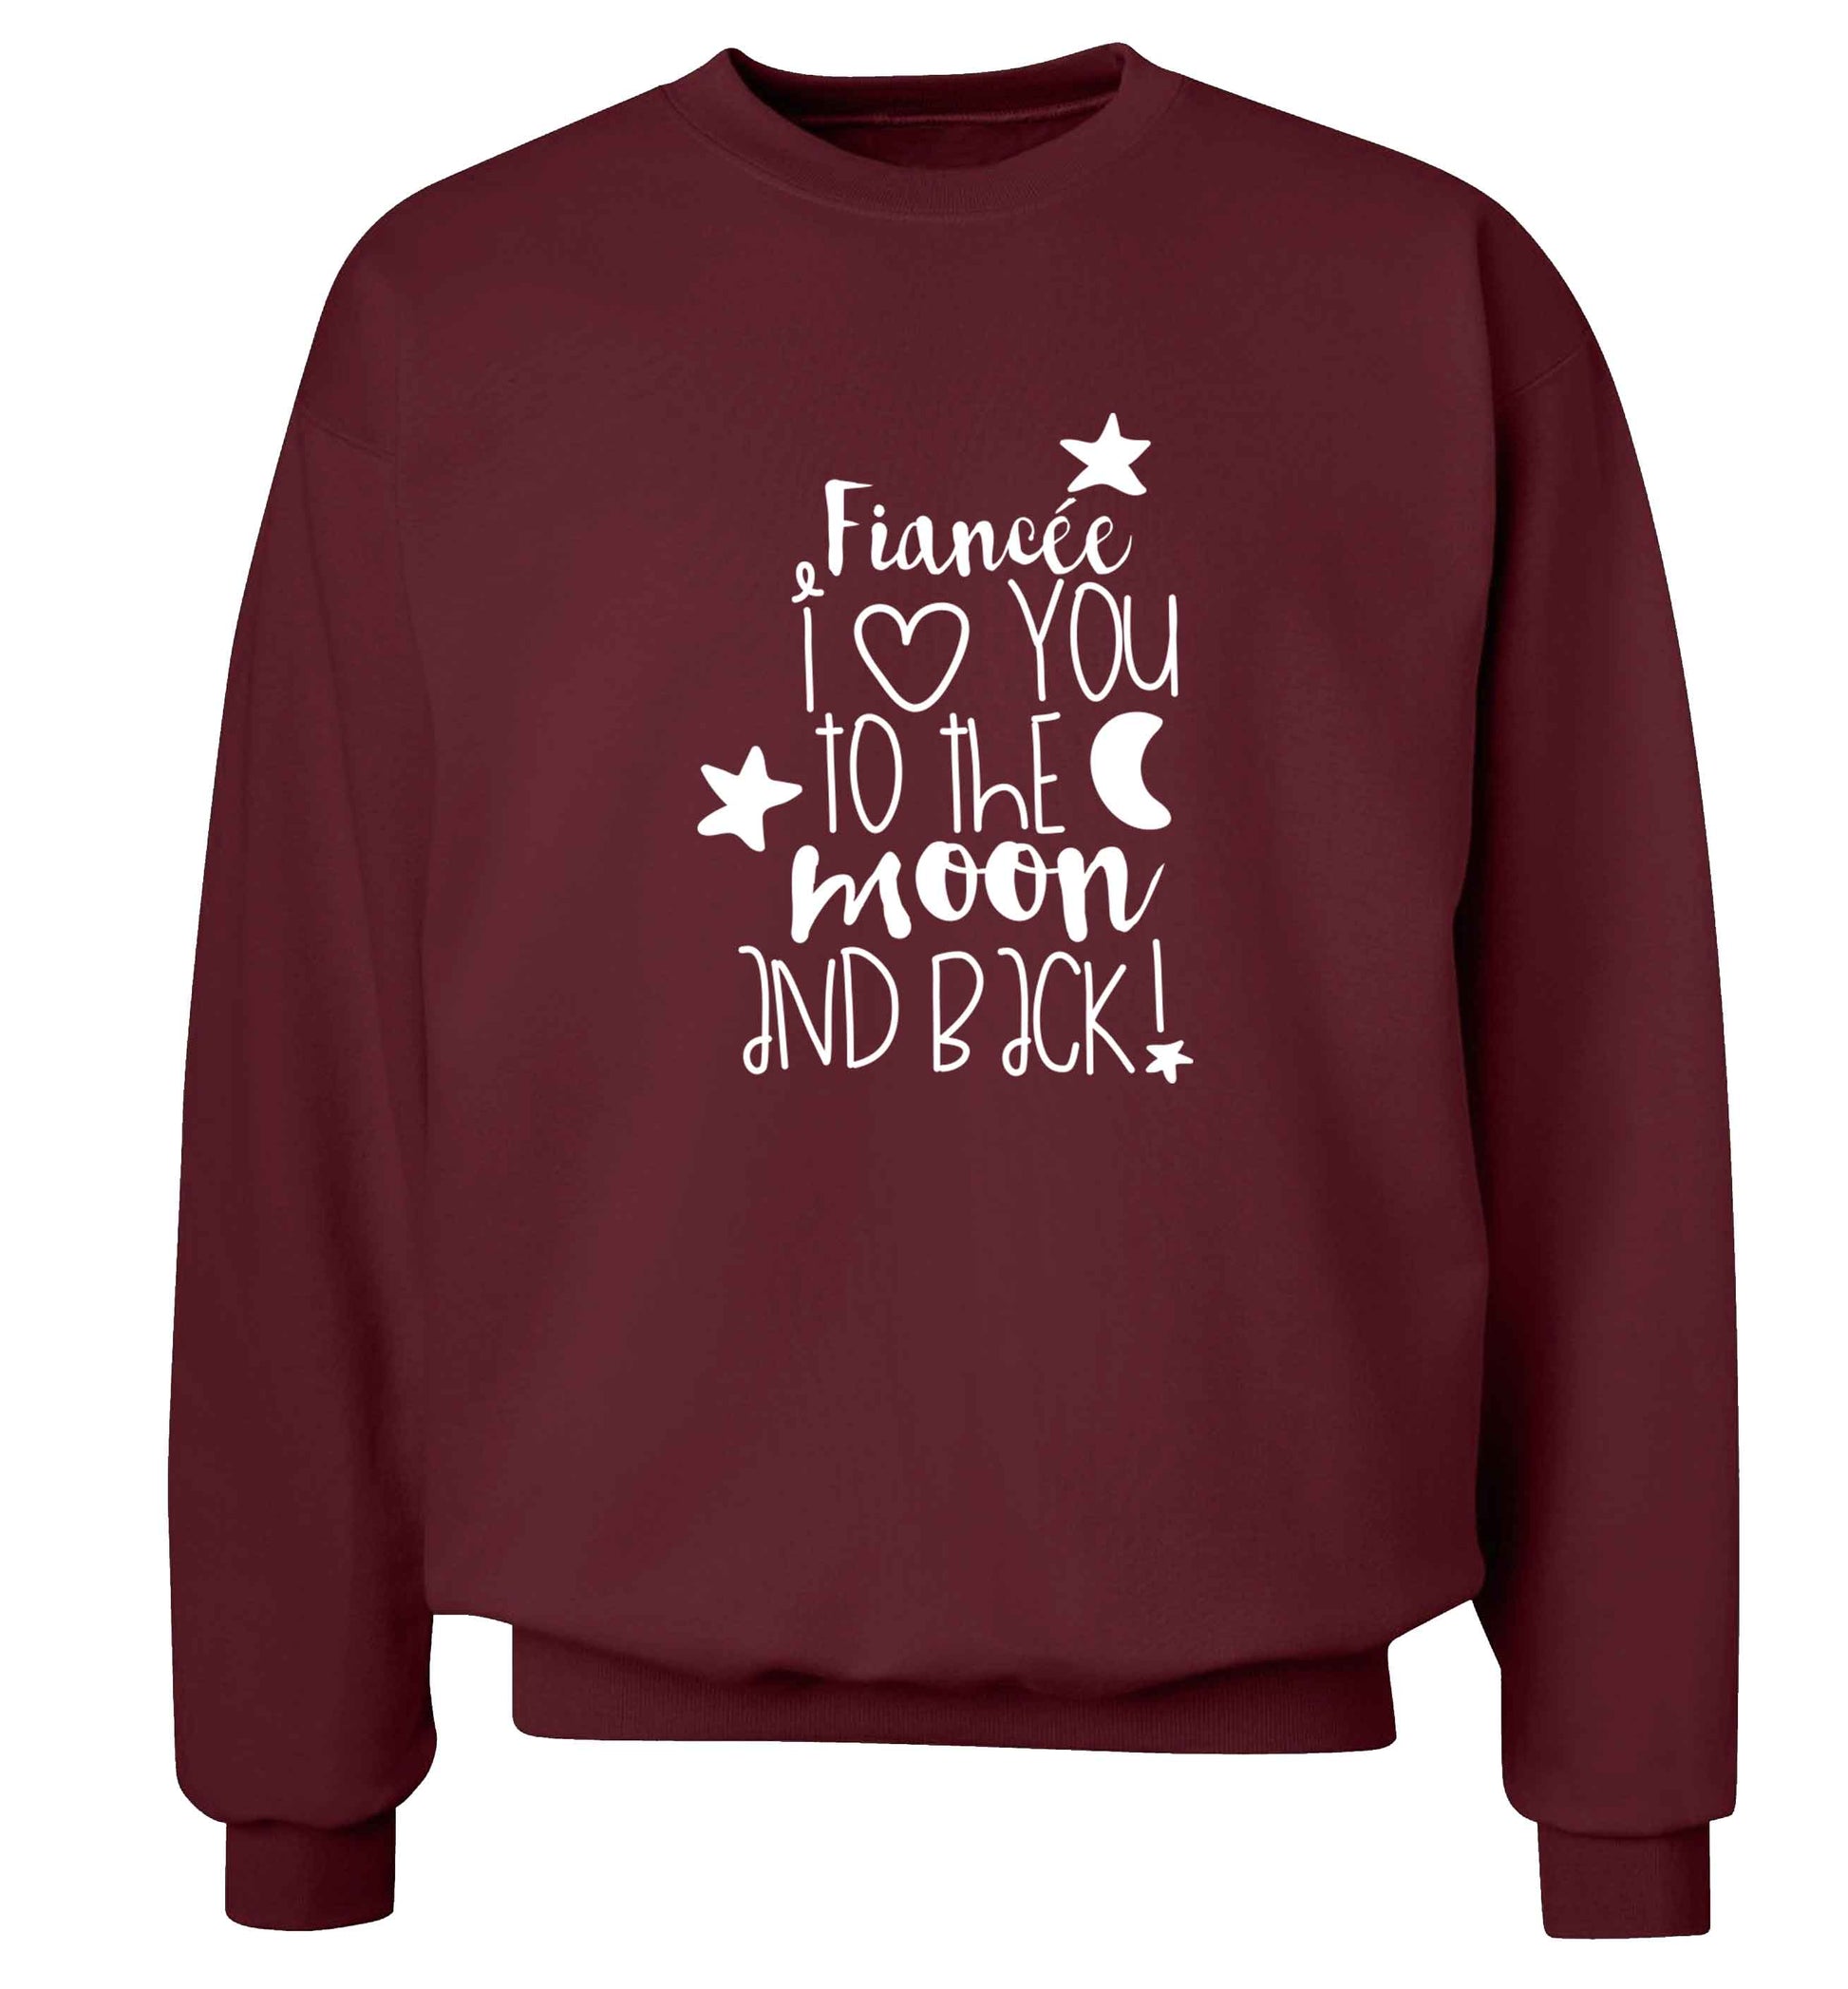 Fiancée I love you to the moon and back adult's unisex maroon sweater 2XL